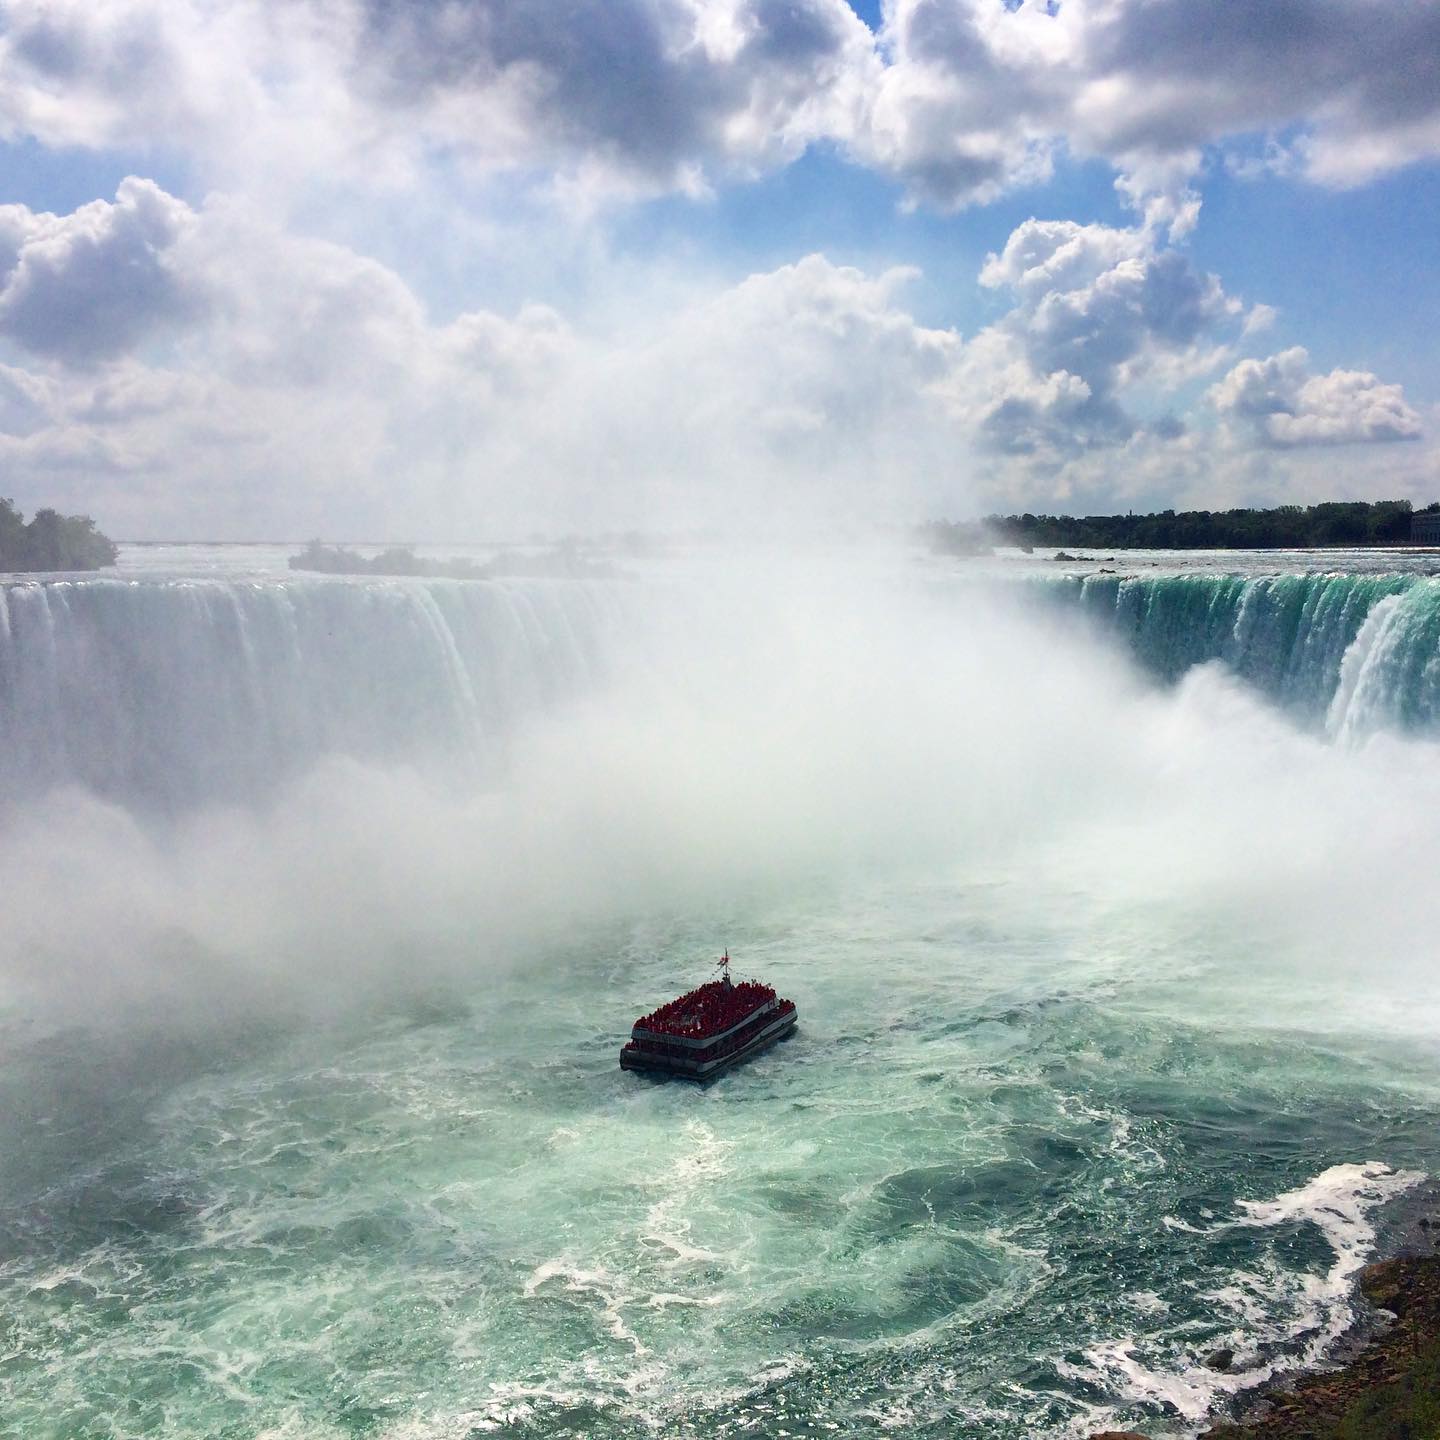 #travelgirl : some things don’t change like this... #travel #niagarafalls #photography #landscape #bucketlisttravel #bucketlistadventures  #bucketlistgirl #travelphotography #travelgram #actricevoyageuse #actresstraveler #actresslife